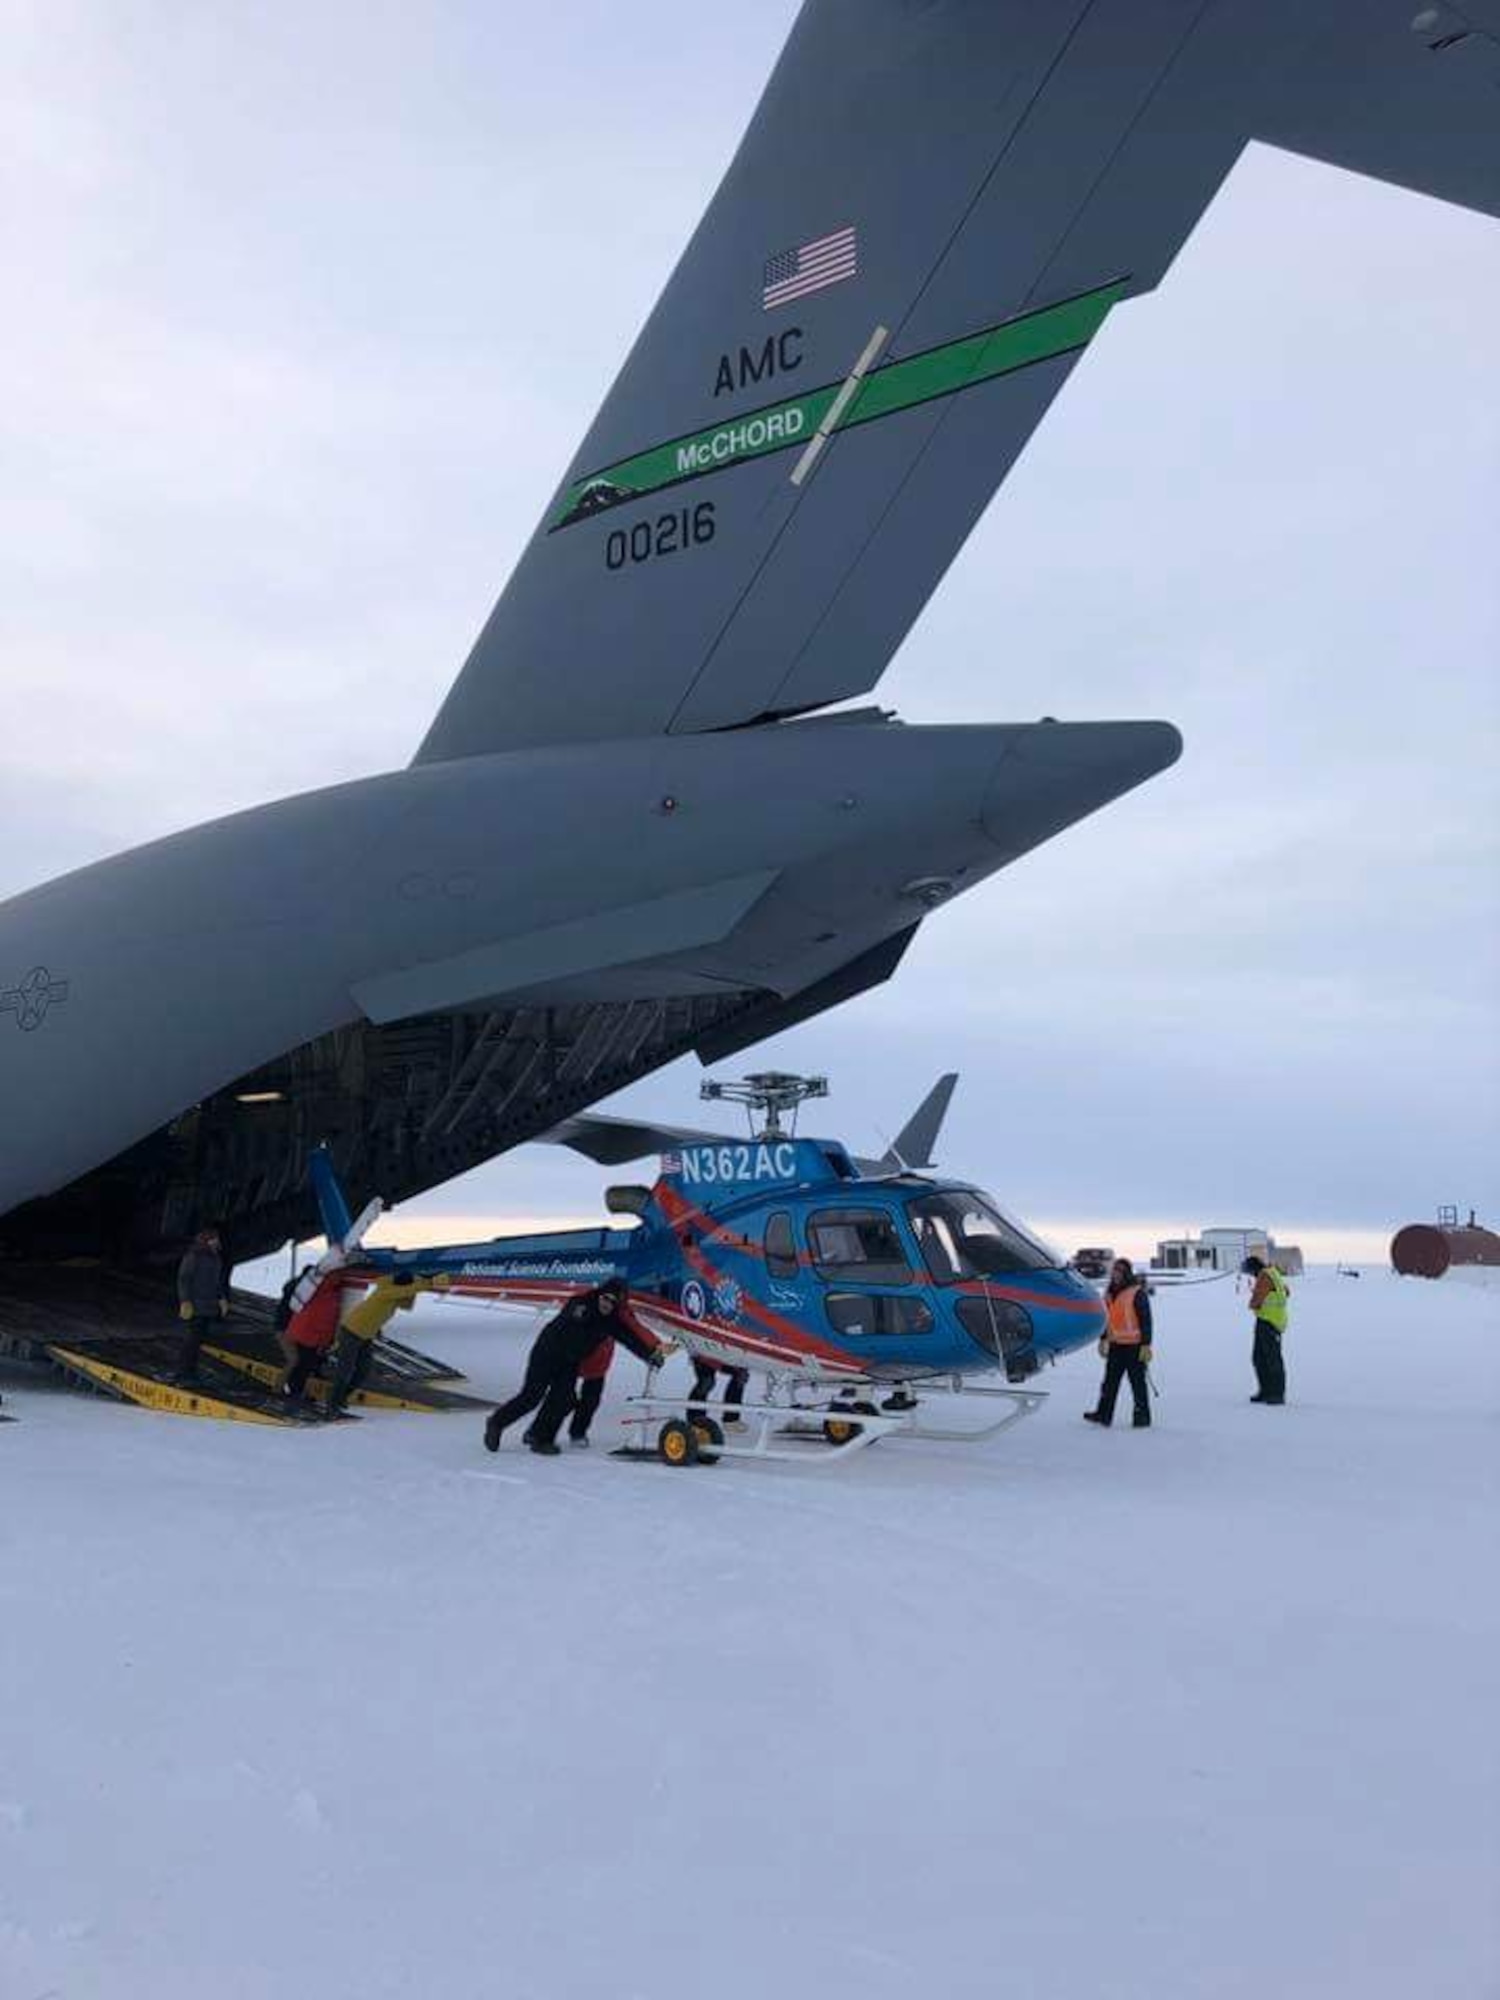 Loadmasters from the 62nd Airlift Wing work with U.S. Antarctic Program cargo handlers to offload a National Science Foundation helicopter on Phoenix Airfield, Antarctica, in this February 2019 file photo. Airmen from Joint Base Lewis-McChord deploy annually as the 304th Air Expeditionary Squadron to Antarctica to deliver people and supplies to the McMurdo scientific research station. (Courtesy photo by Lt. Col. Brandon Tellez)